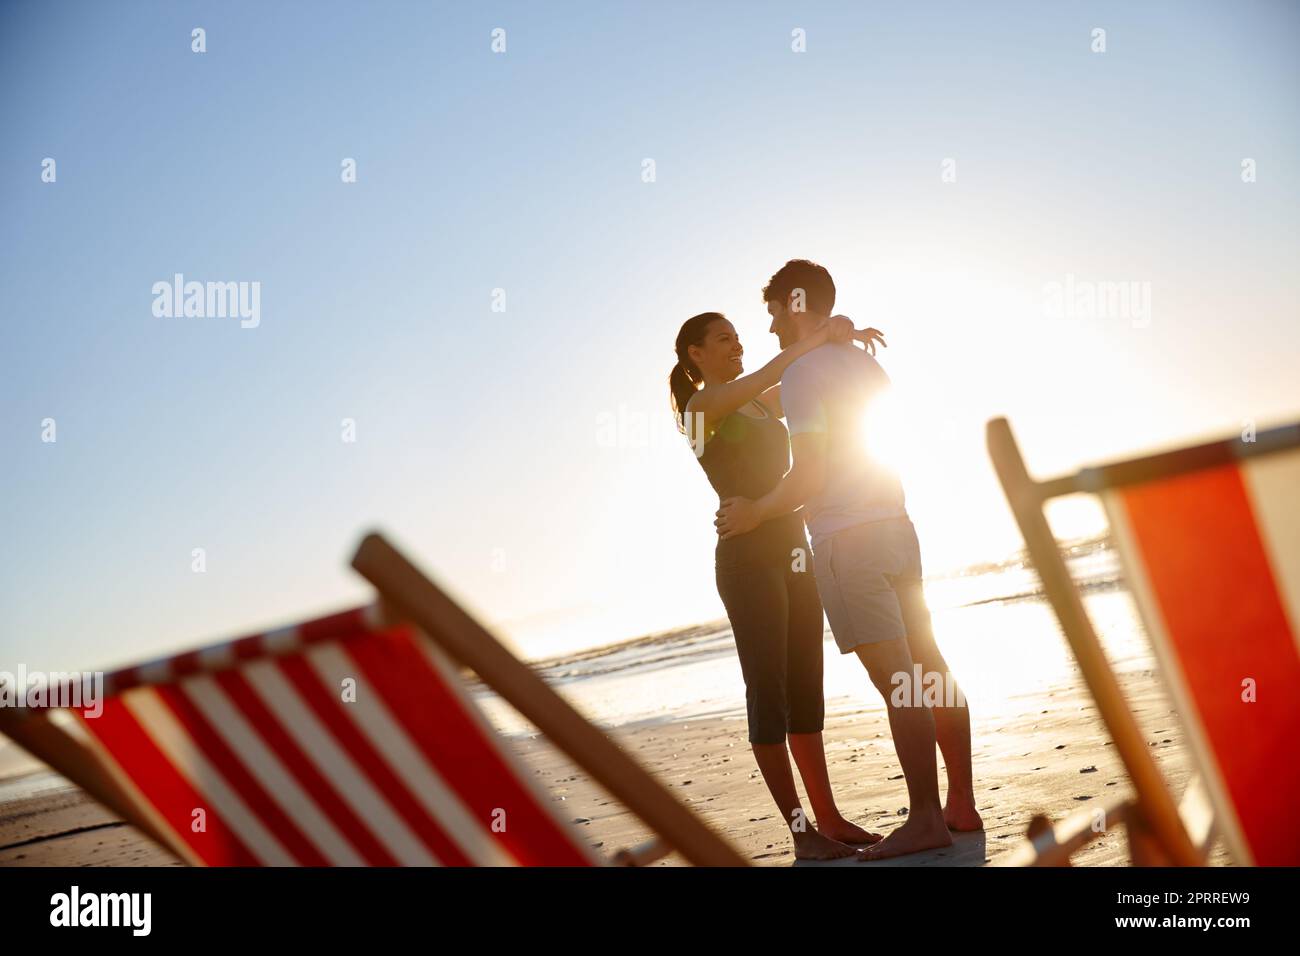 Romantic getaway for fresh romance. a happy young couple on a beach with deck chairs. Stock Photo